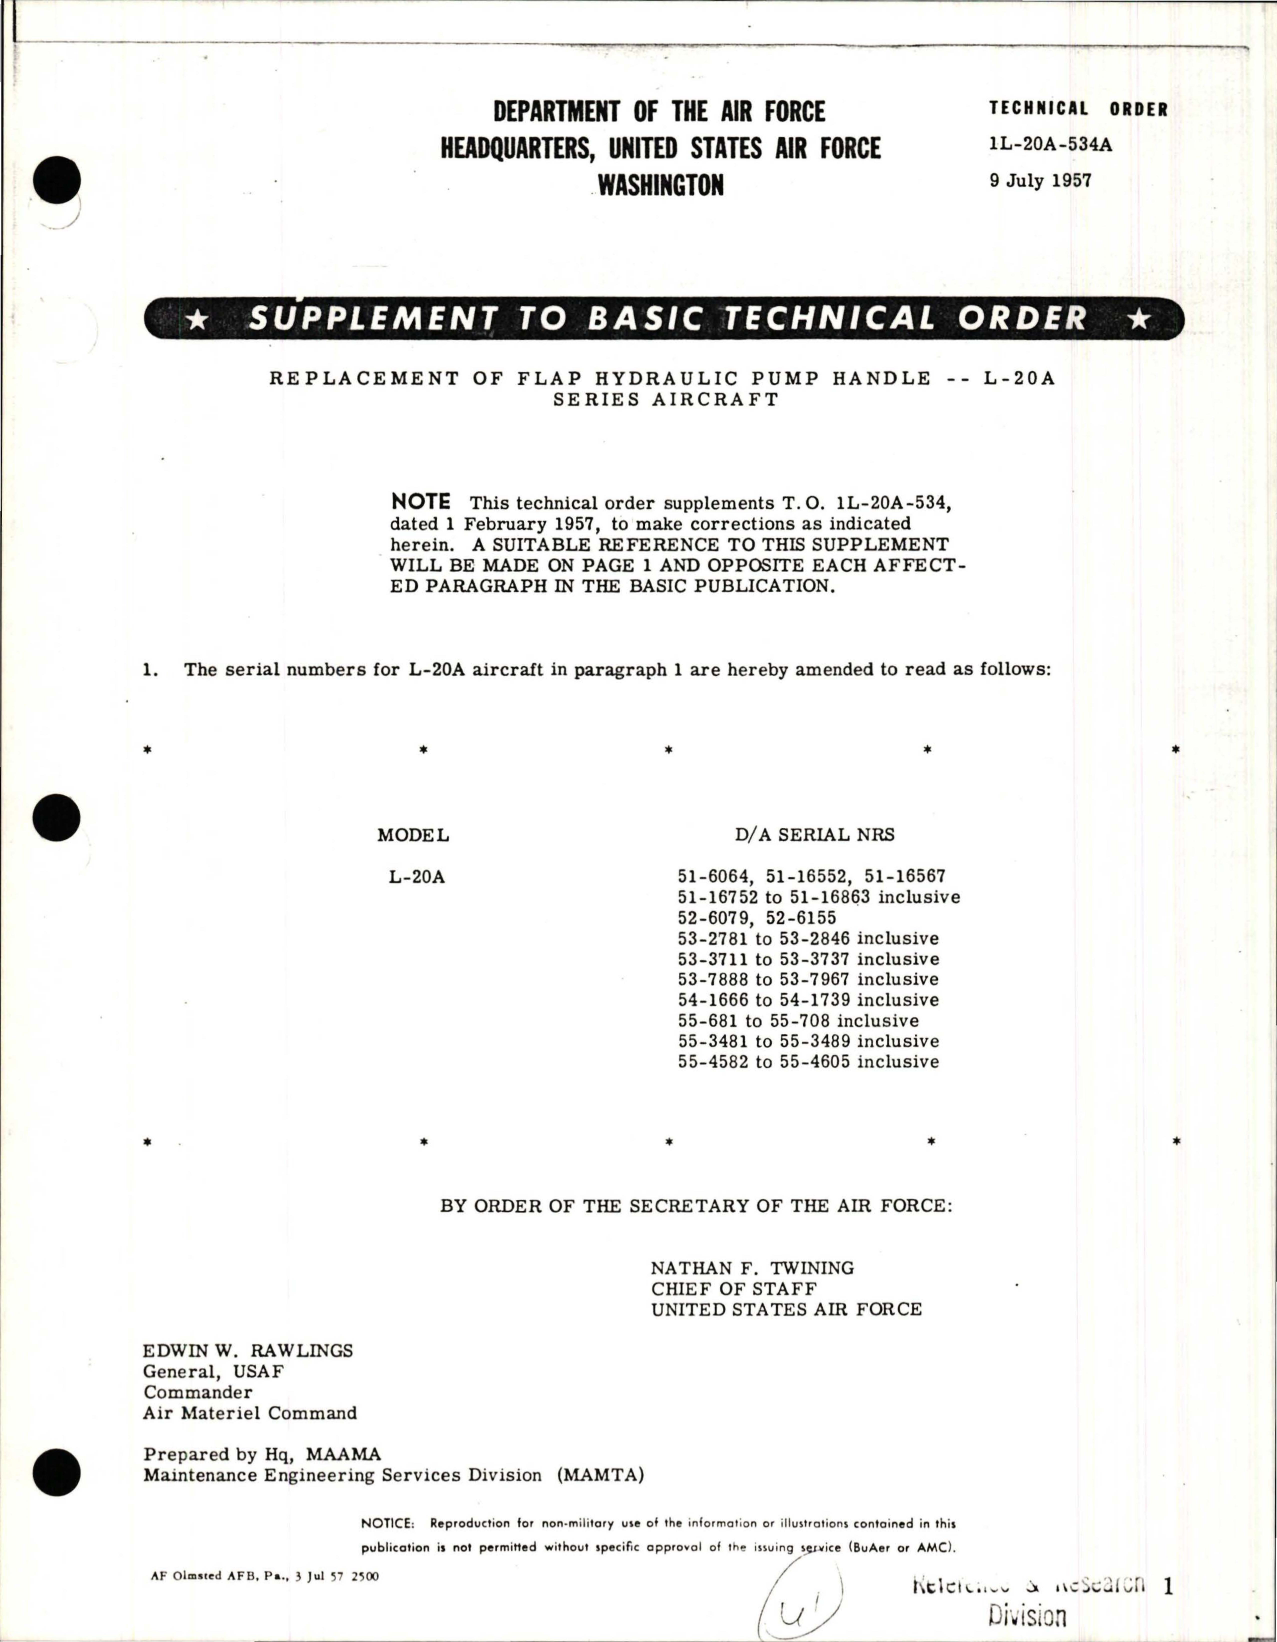 Sample page 1 from AirCorps Library document: Supplement to Replacement of Flap Hydraulic Pump Handle - L-20A Series